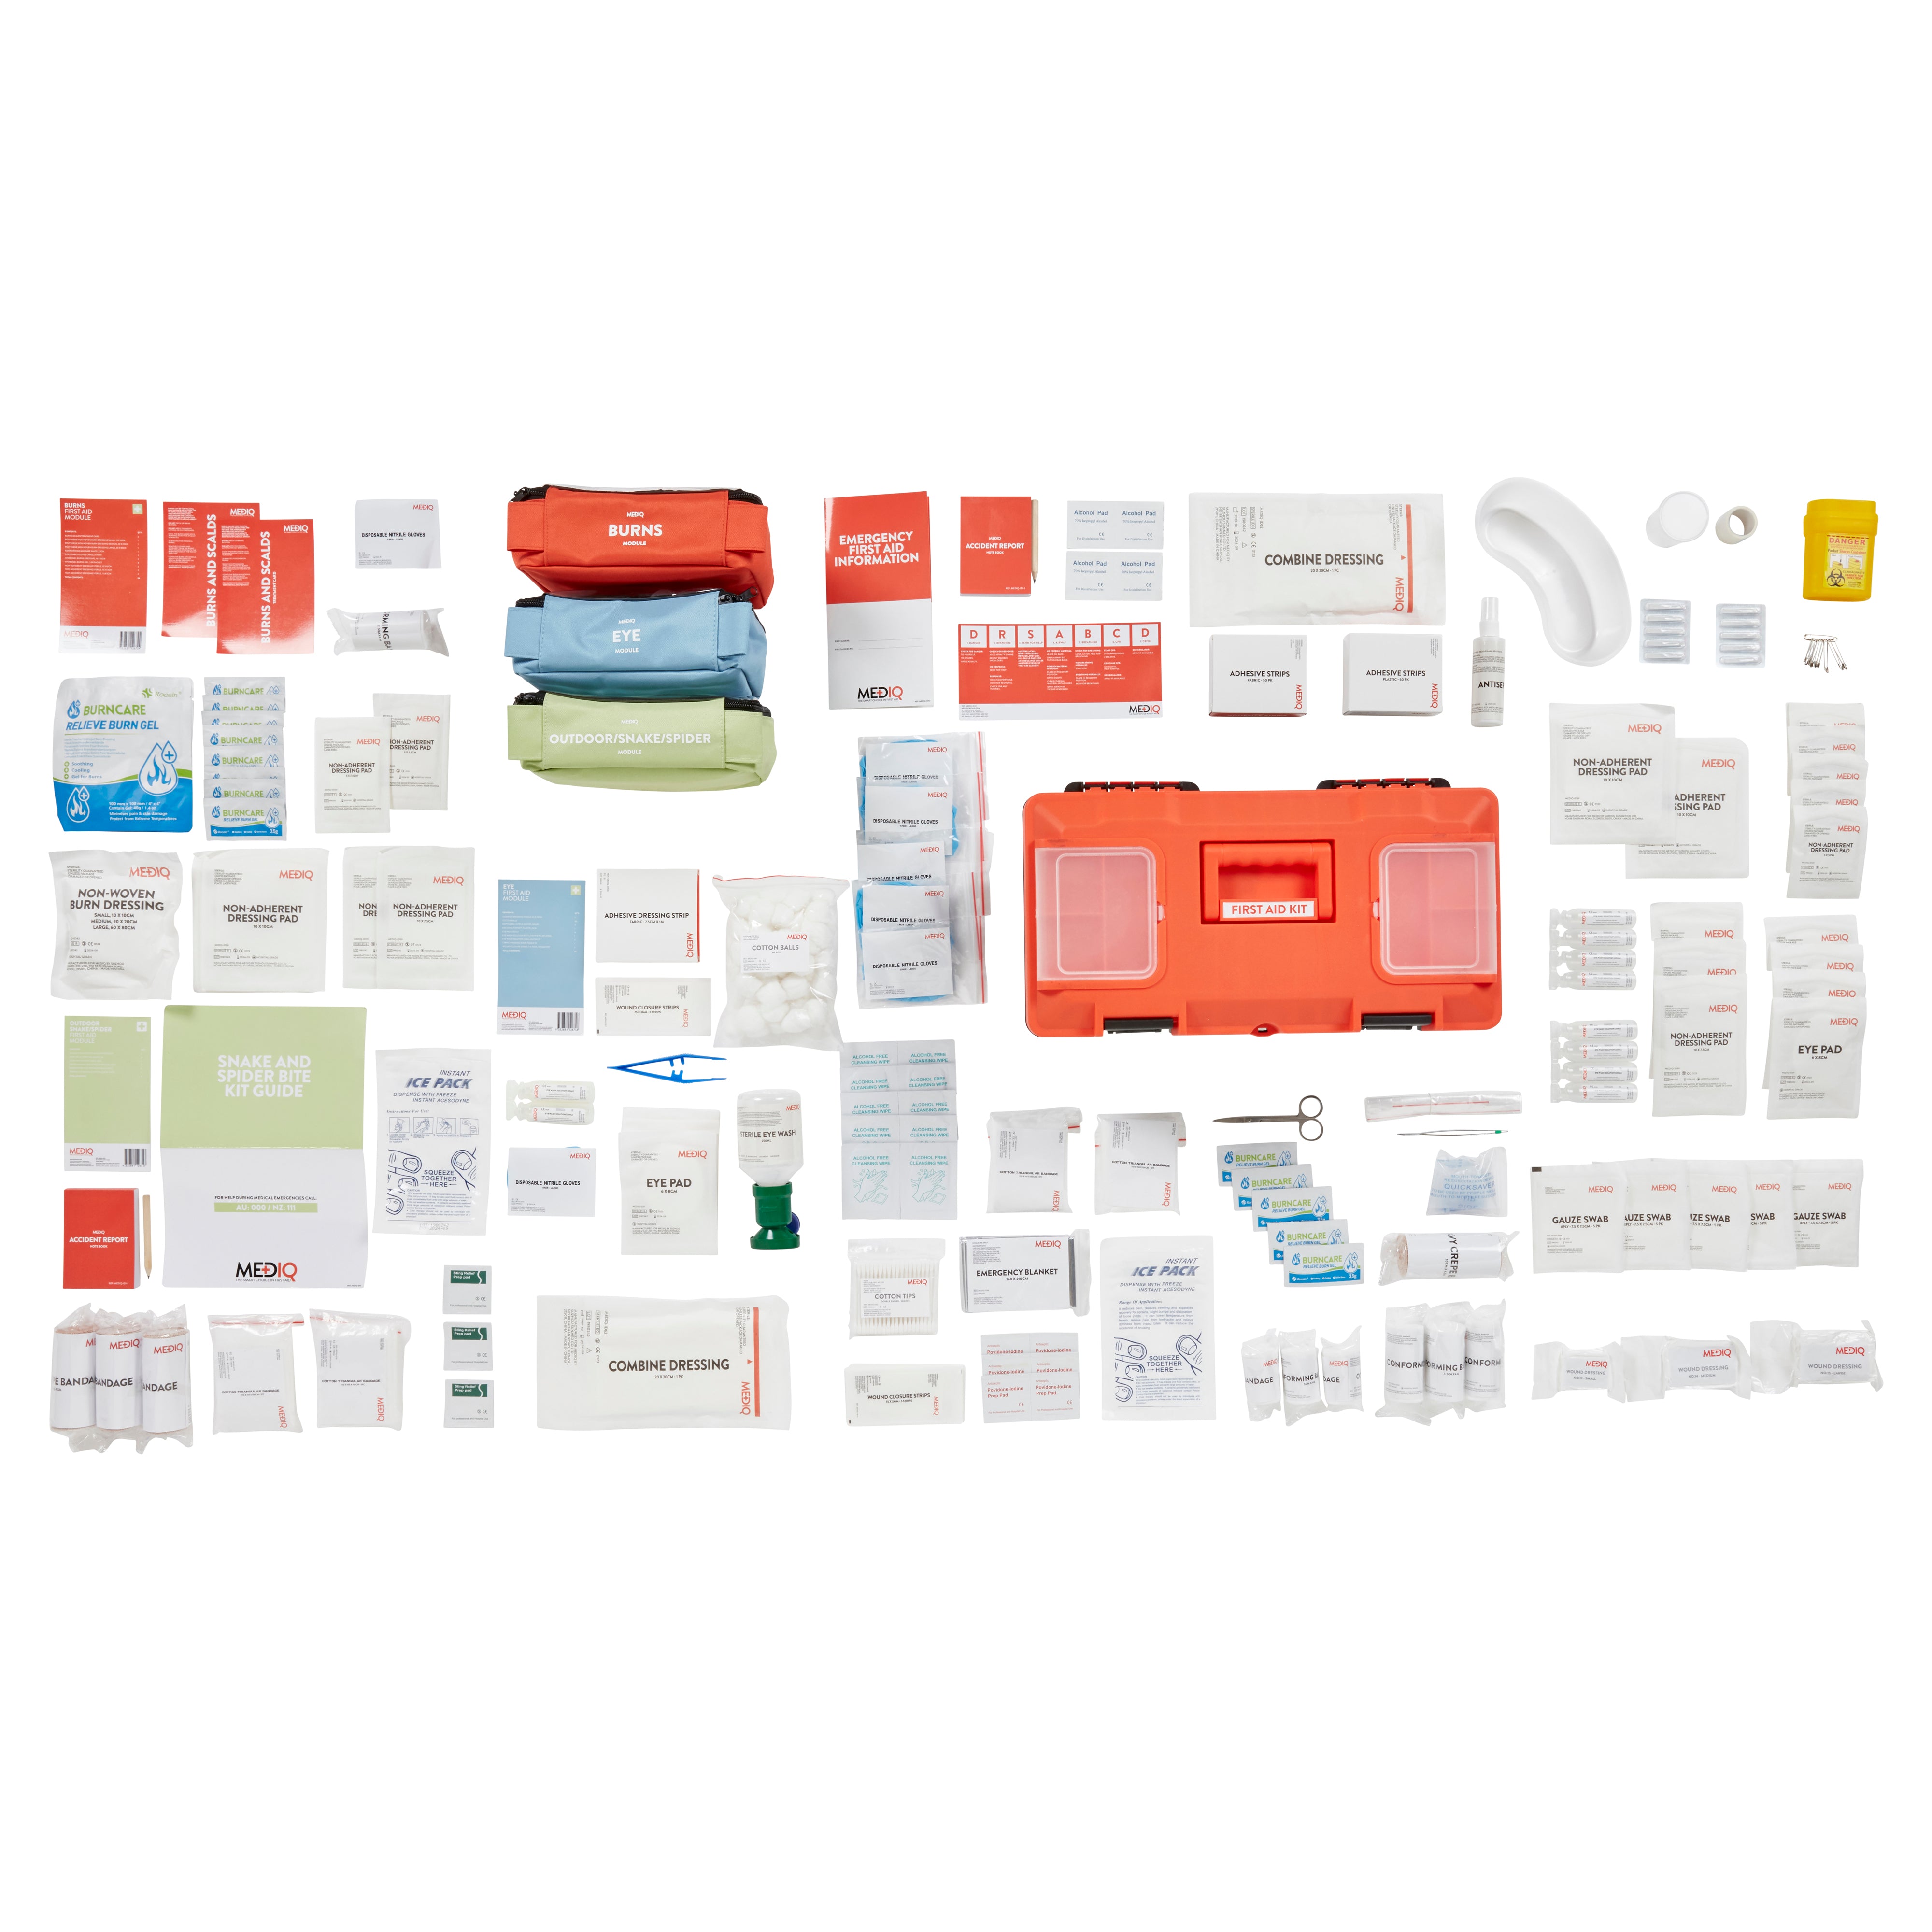 Mediq Industrial Response First-Aid Kit ( Plastic Tackle Box ) High Risk - WHSAFETY